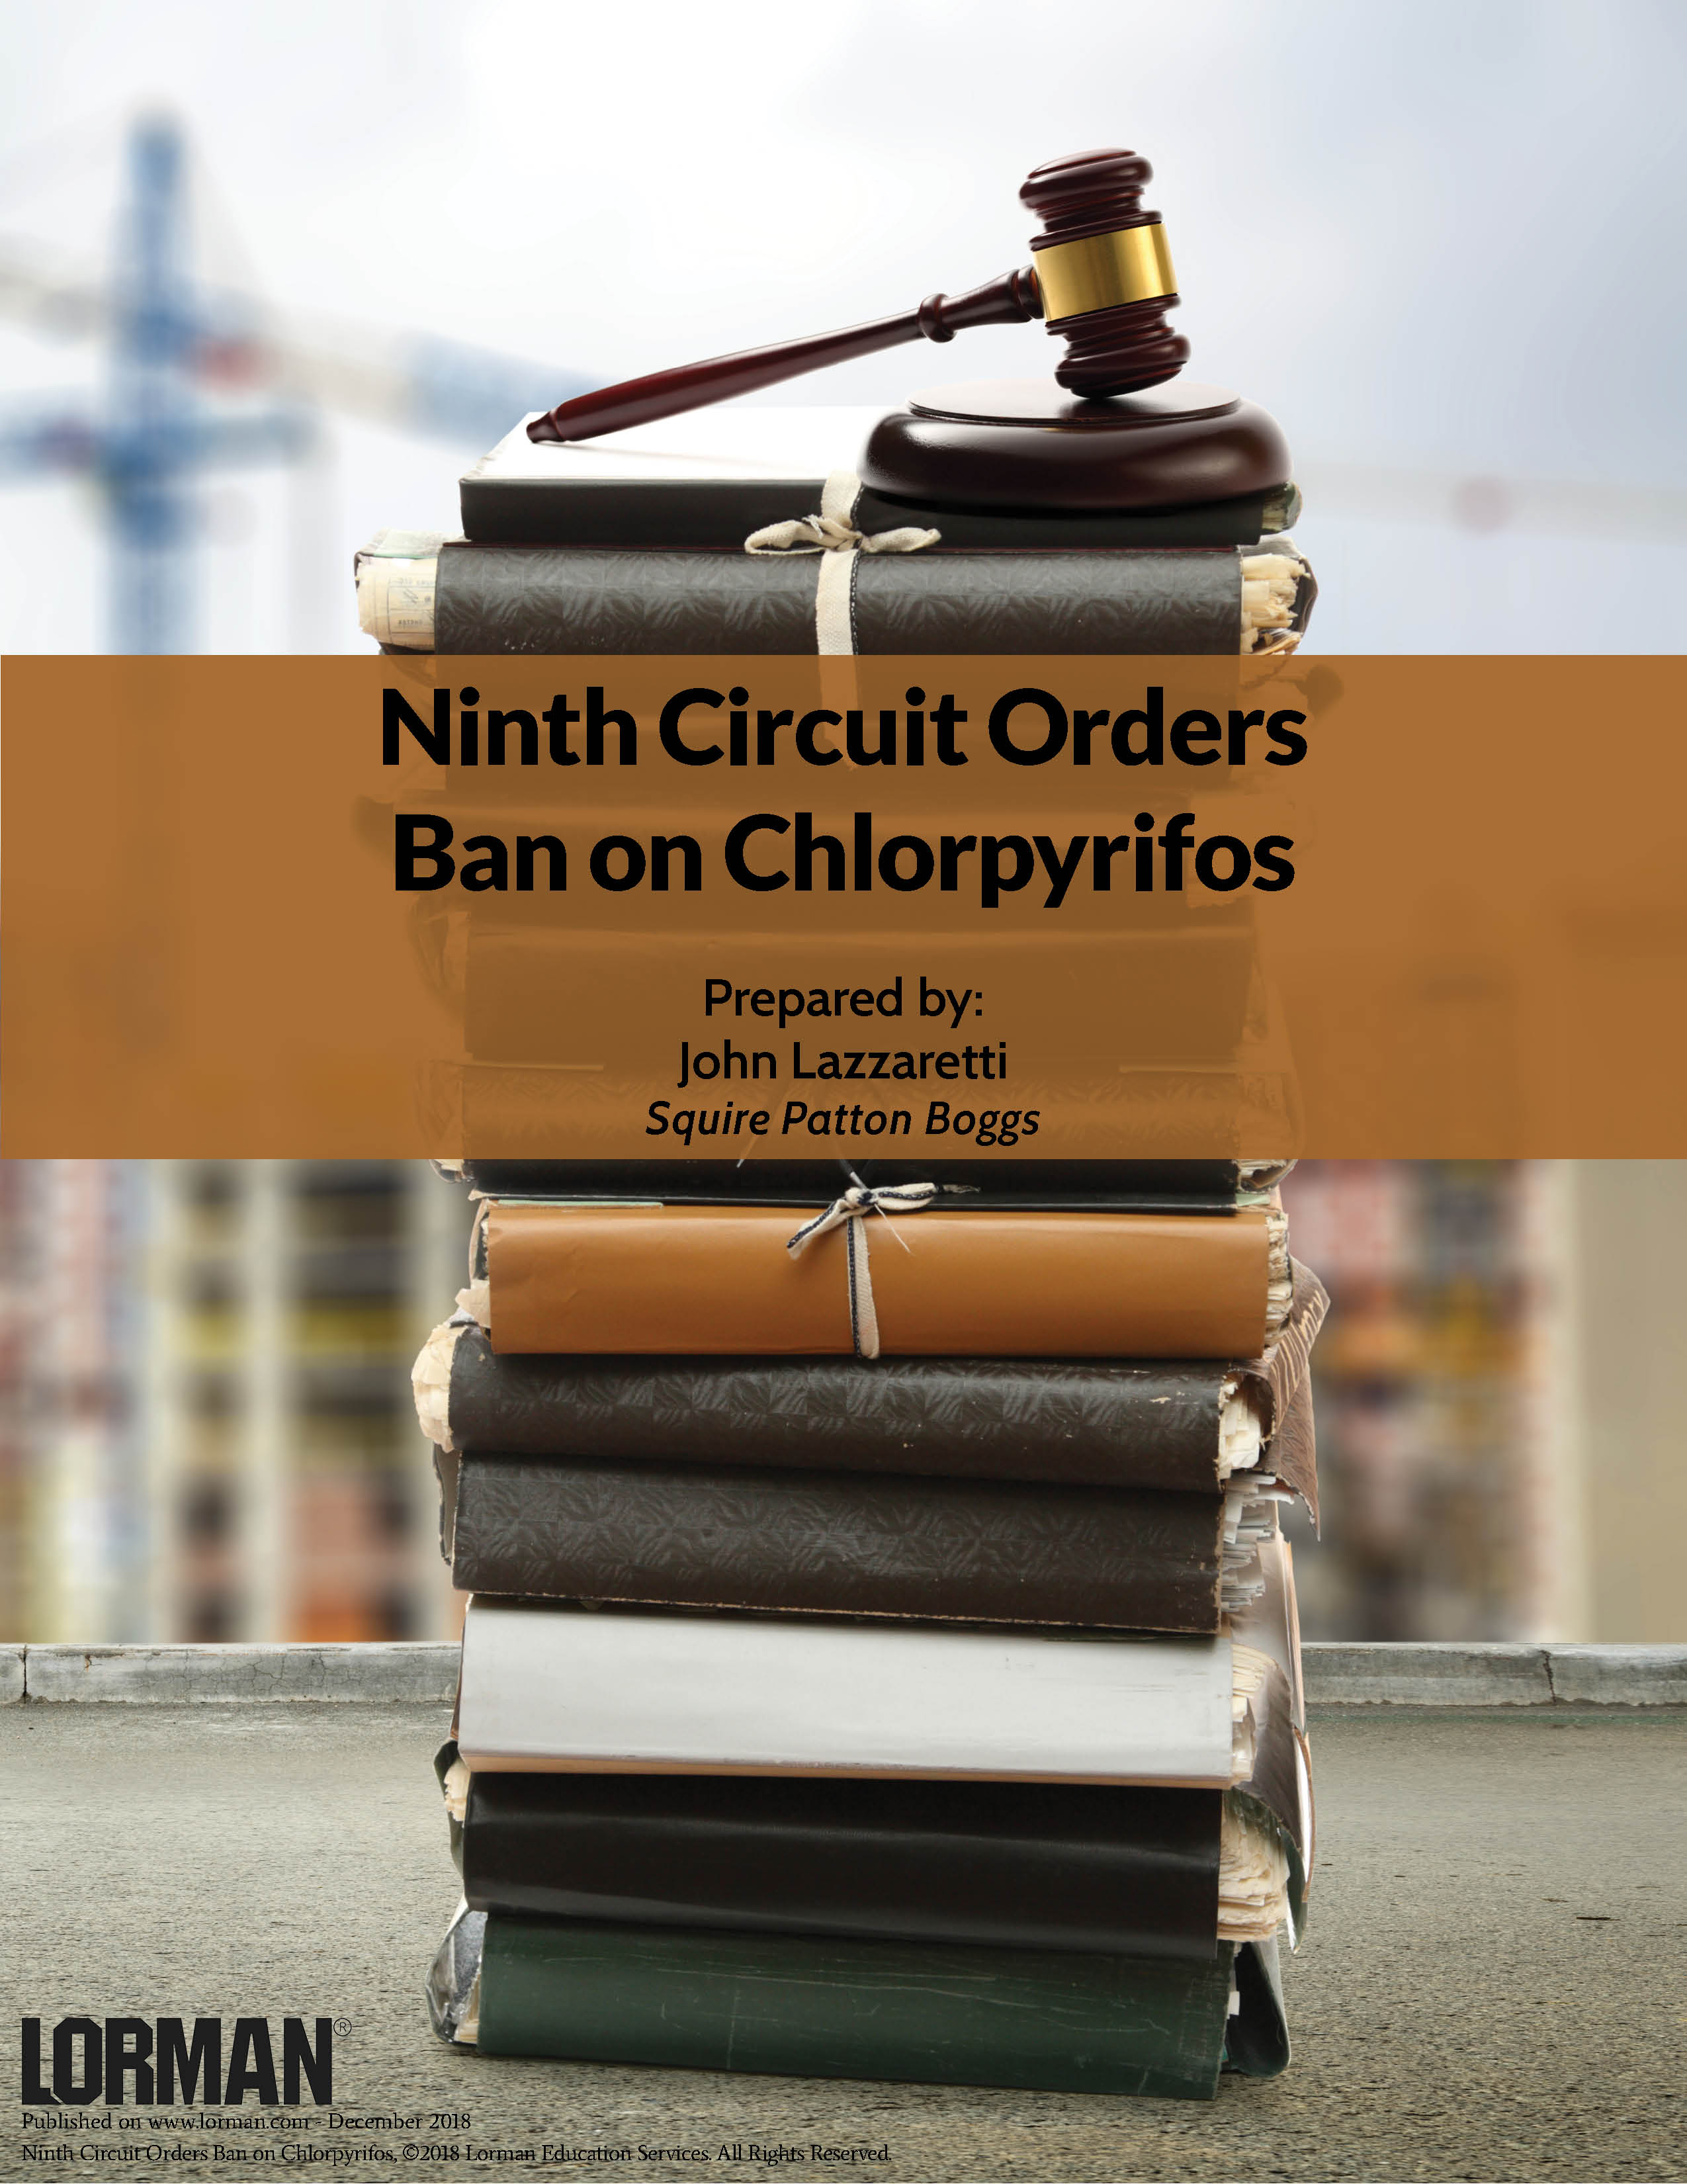 Ninth Circuit Orders Ban on Chlorpyrifos